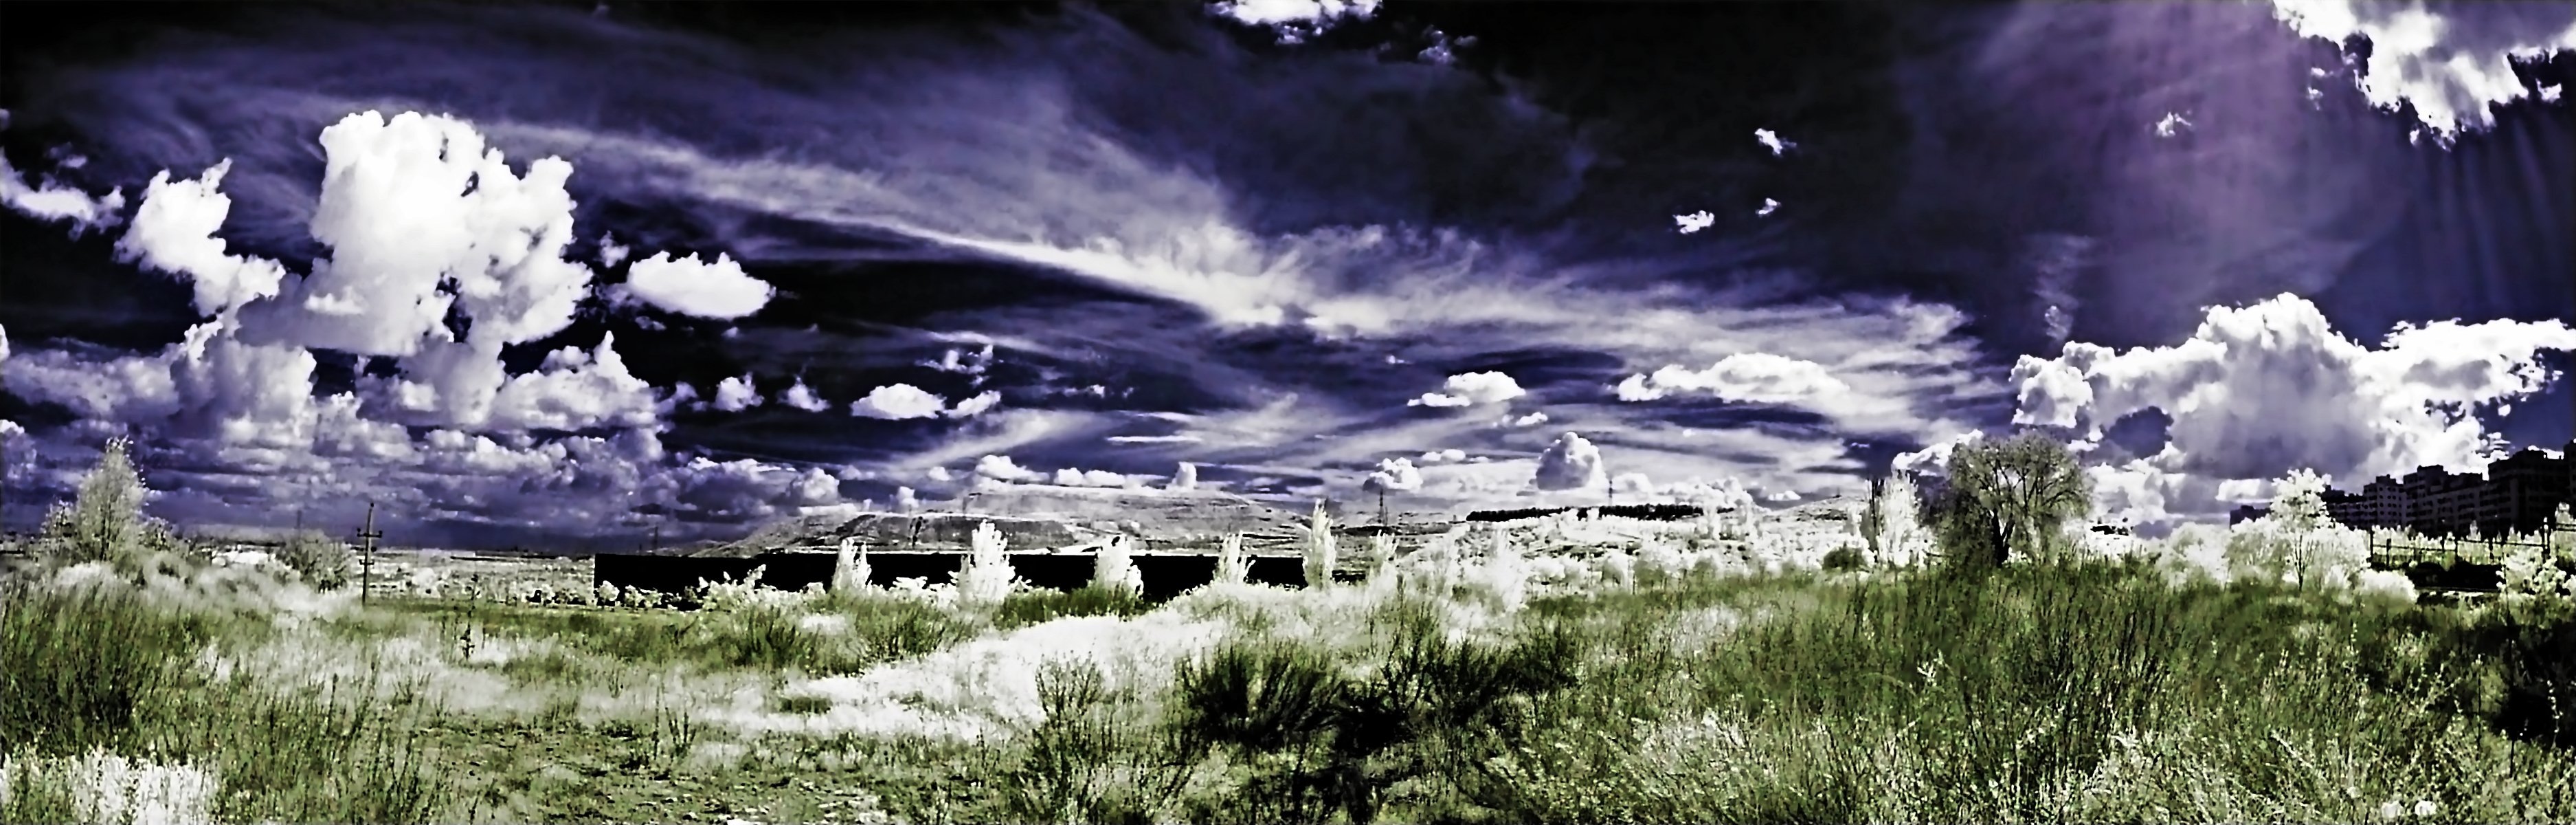 Photography Infrared 3749x1200